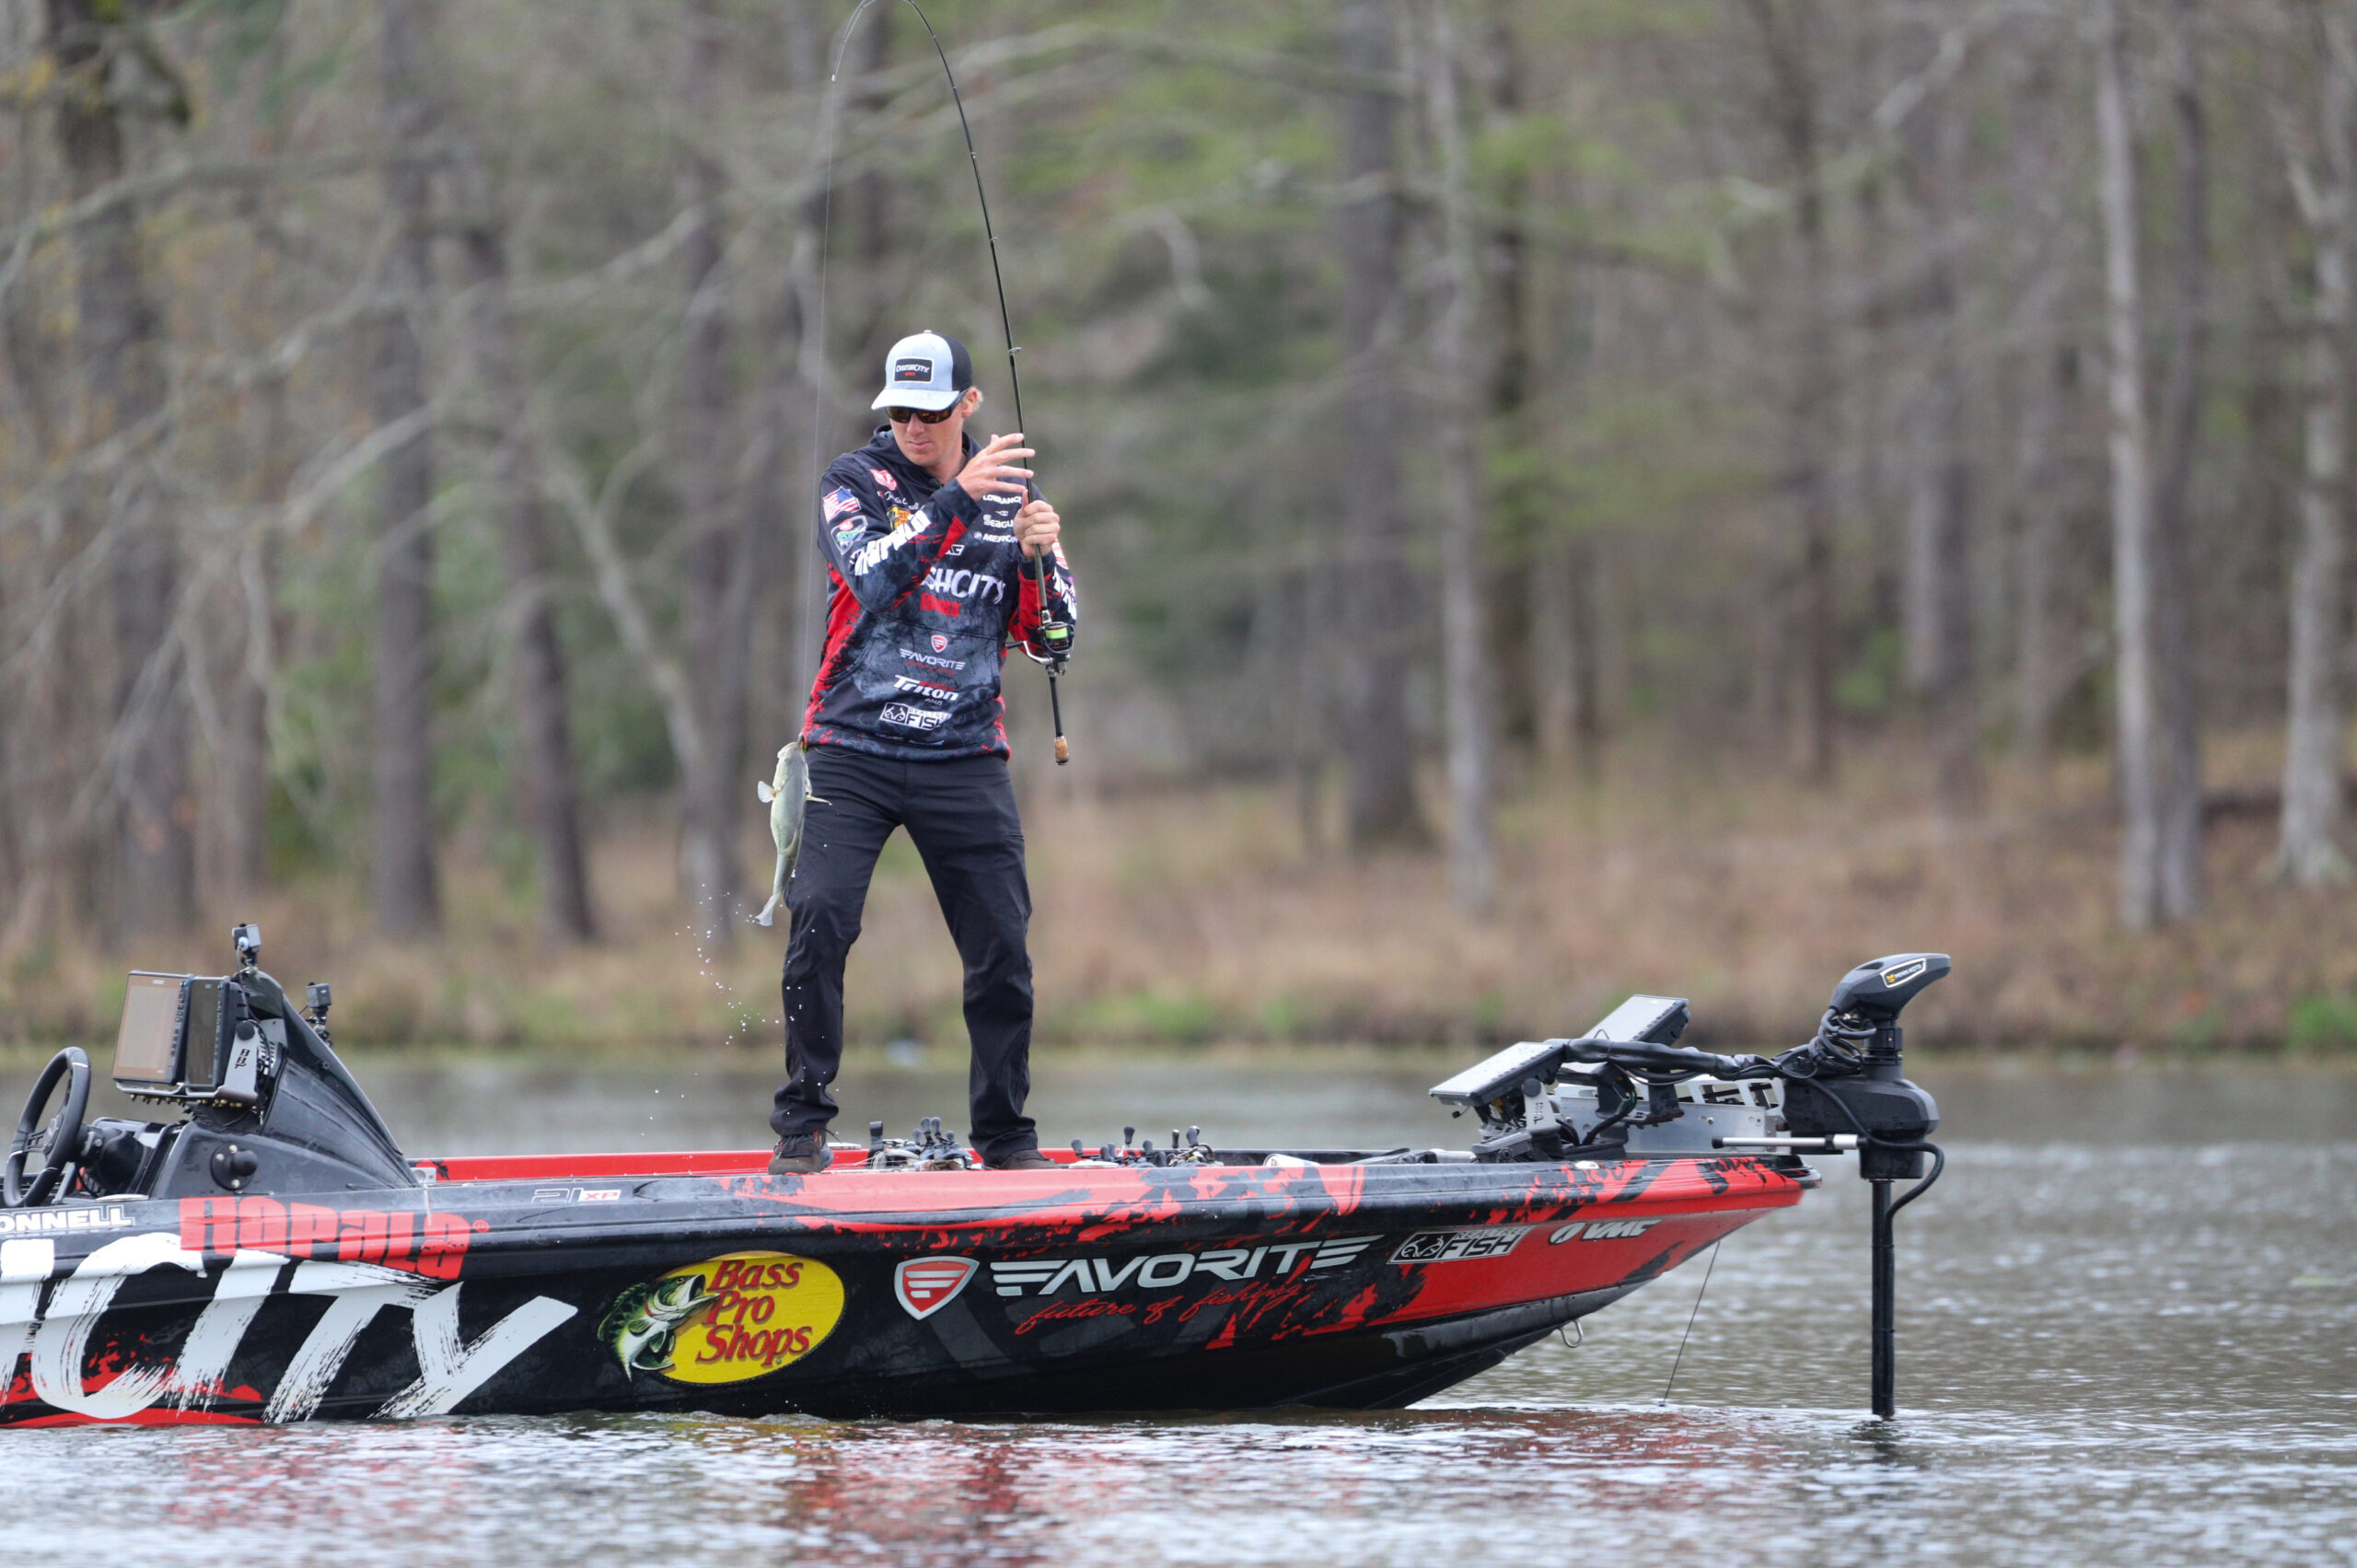 Ask the Anglers Presented by Champion: What's Your New Year's